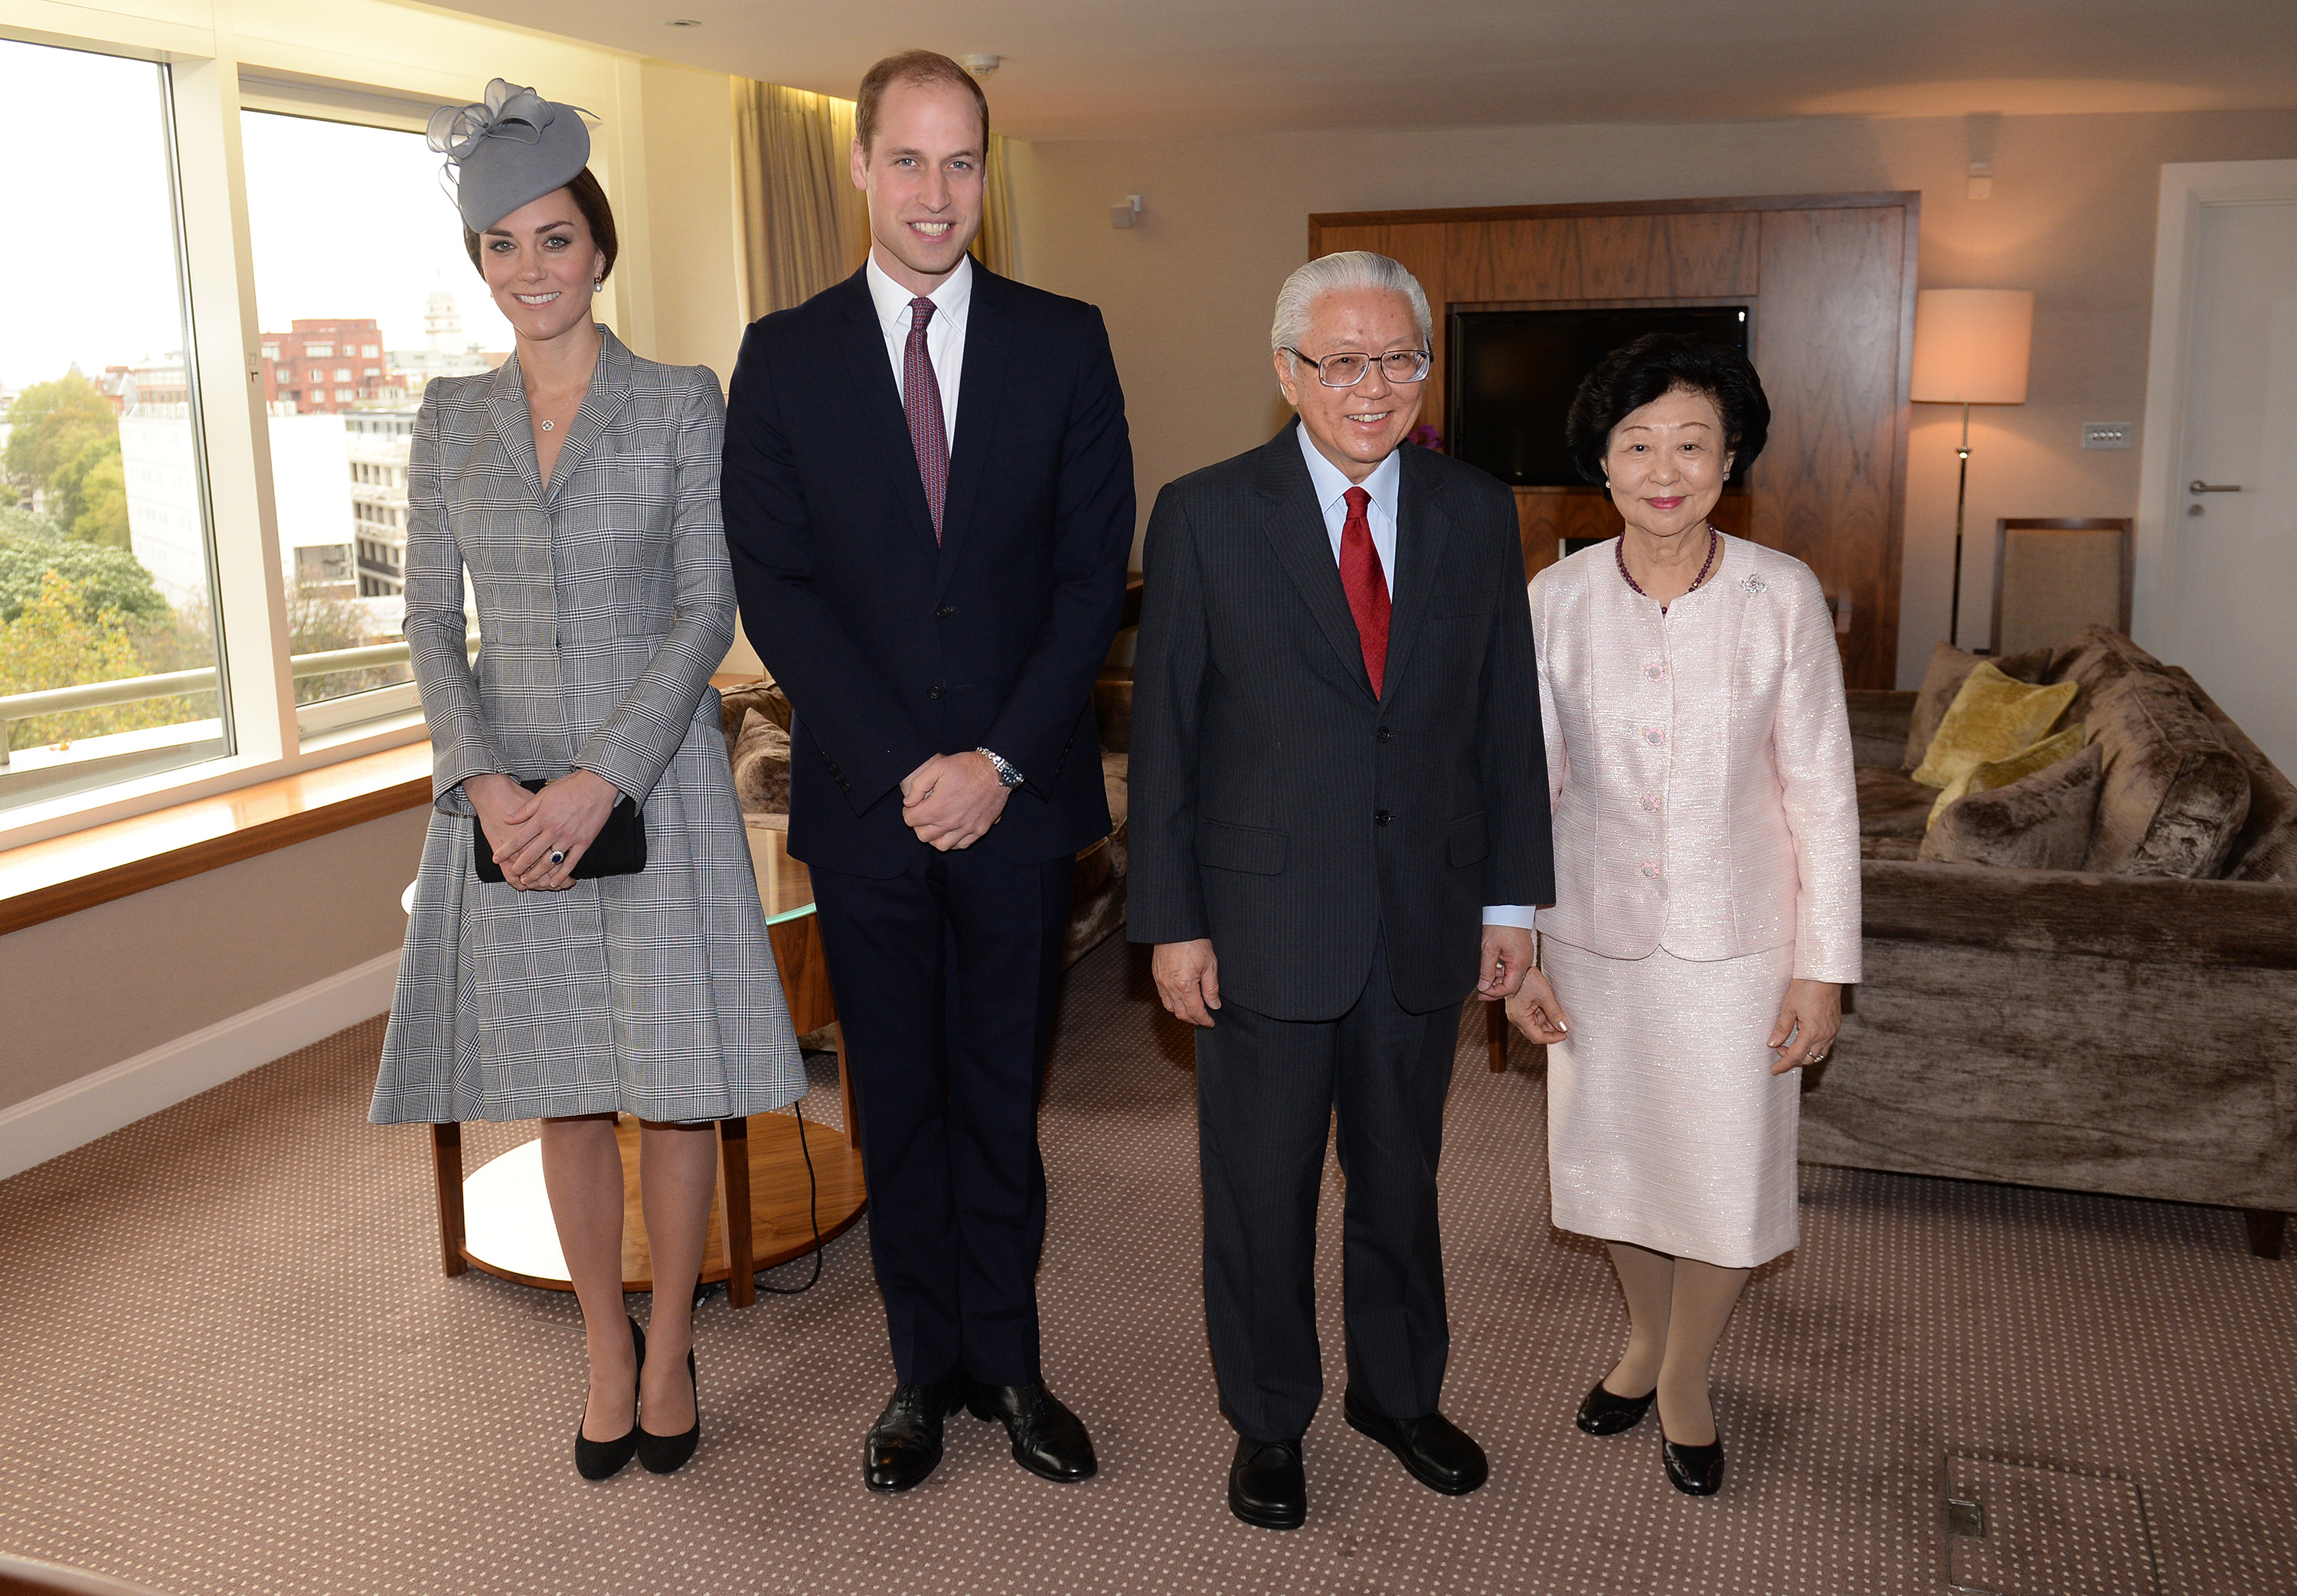 The Duke and Duchess of Cambridge greet the president of Singapore